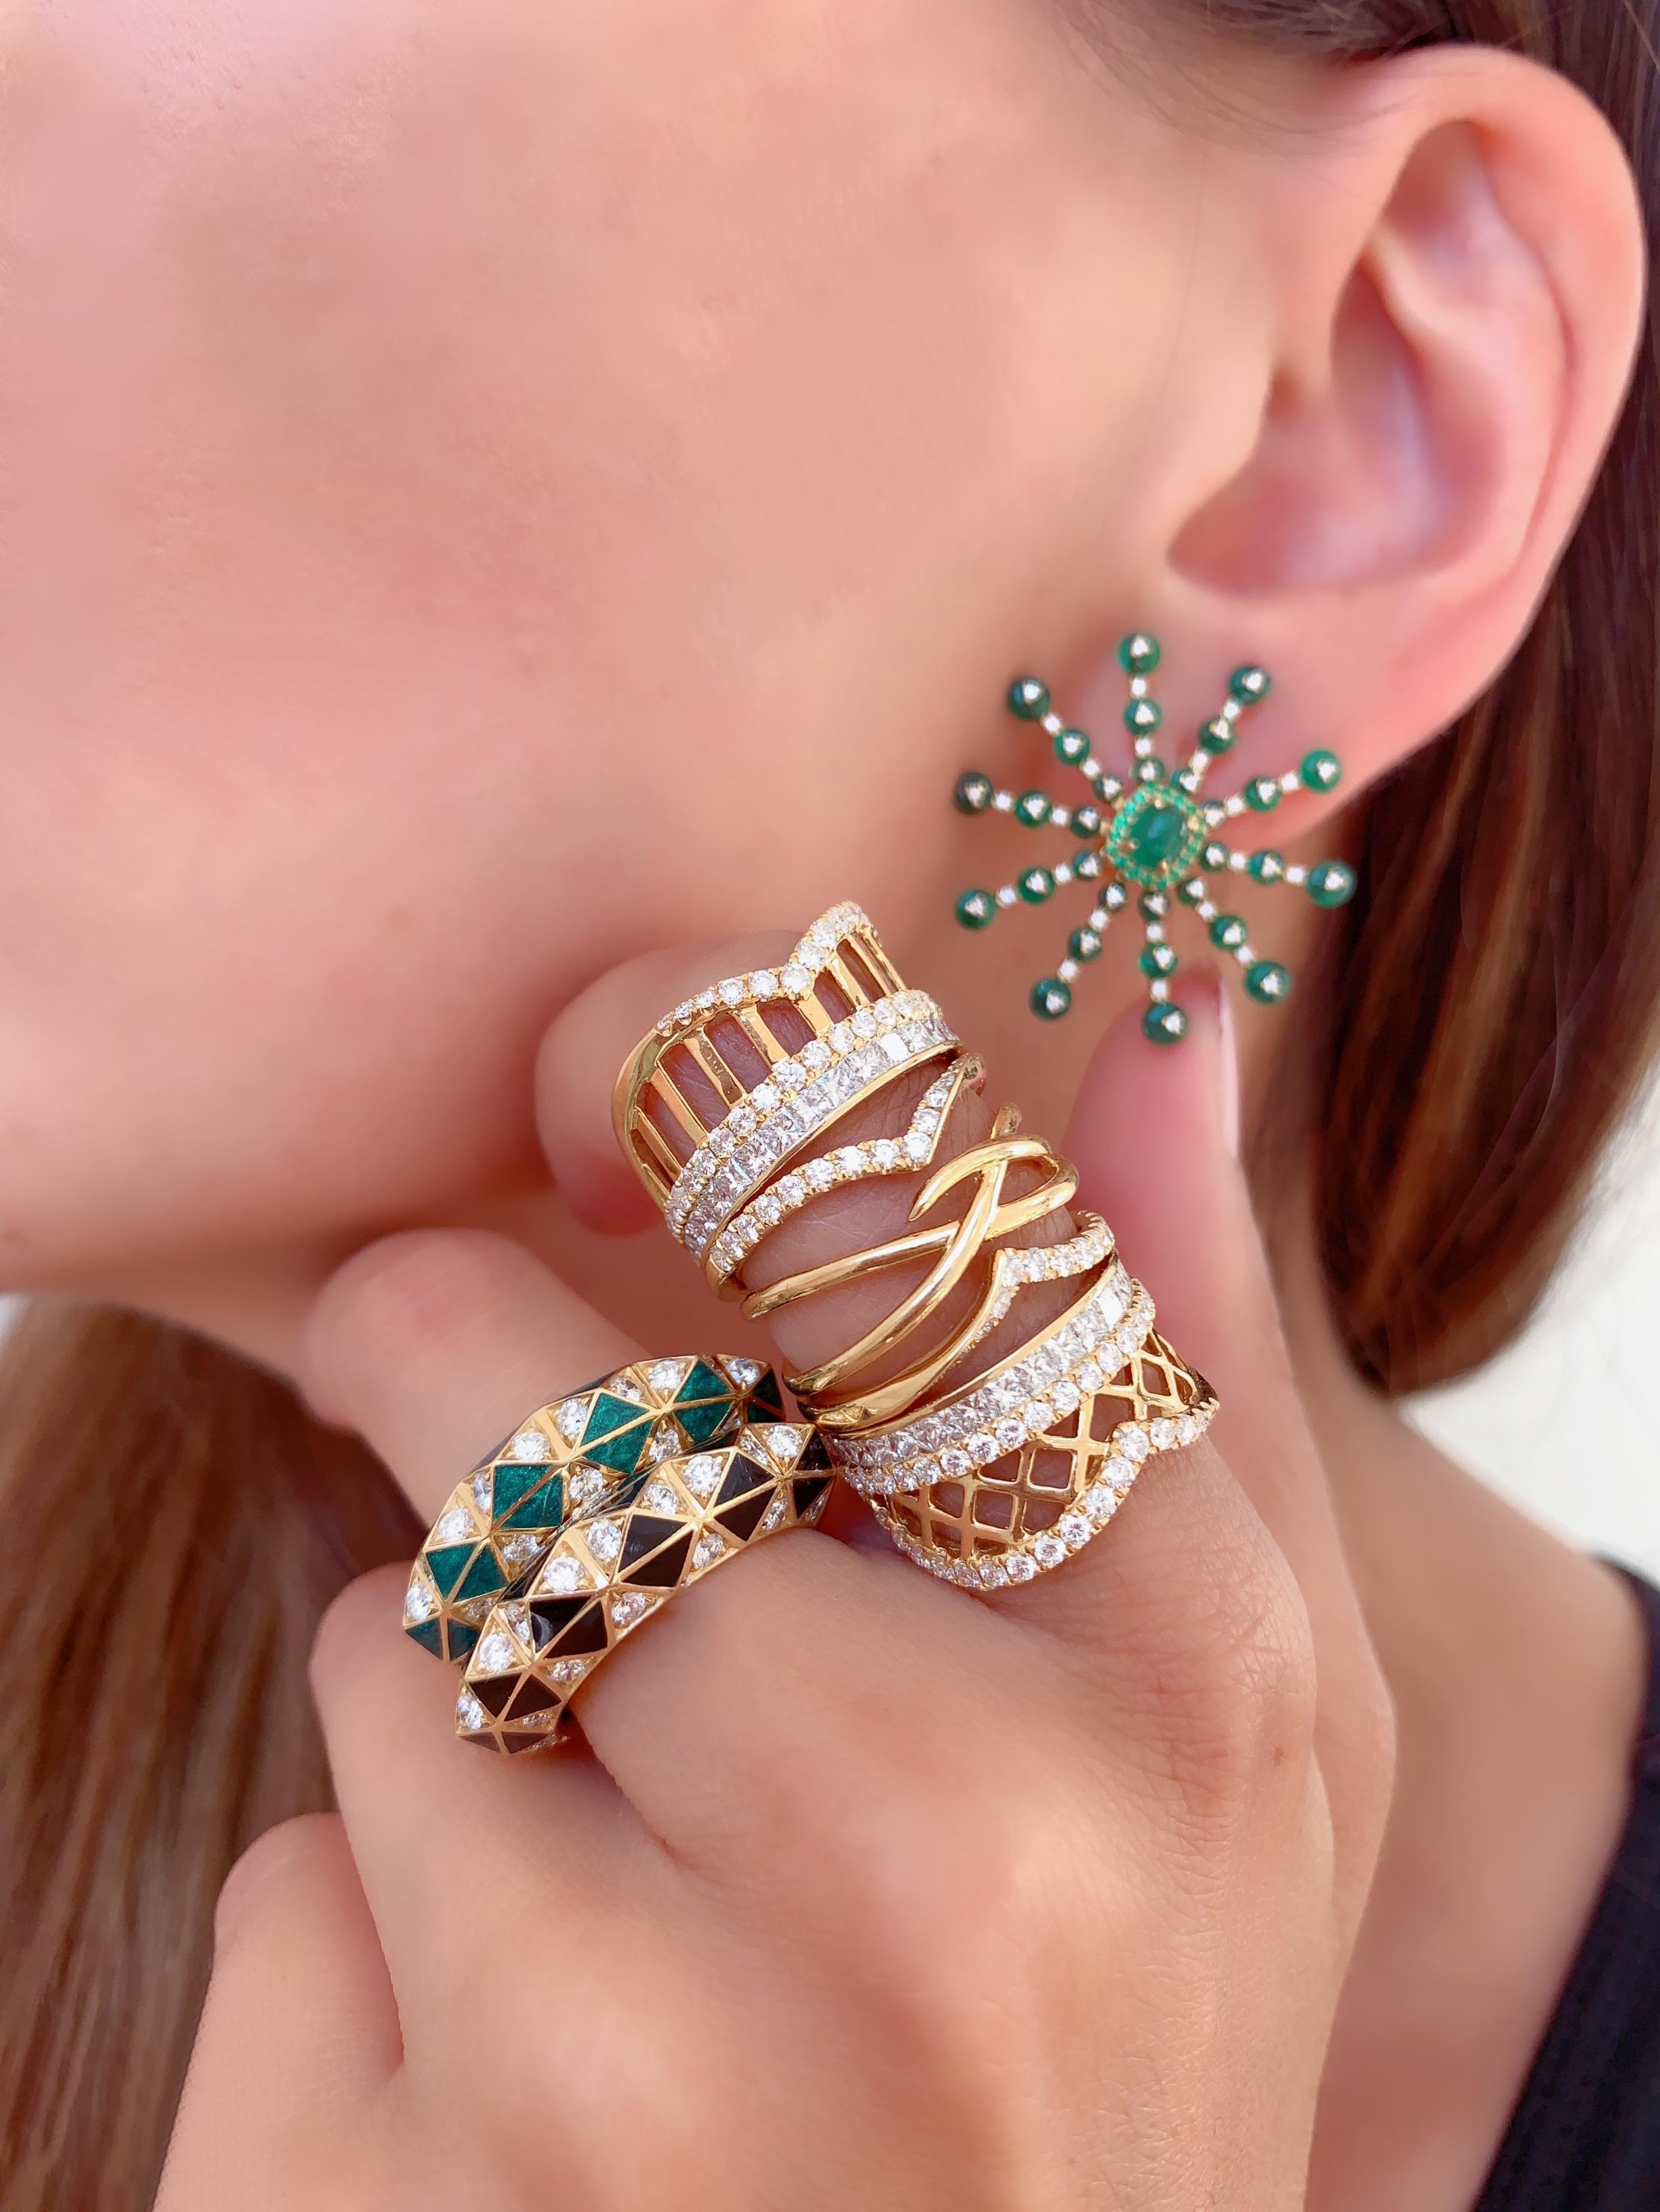 A Diamond and Enamel Gold Ring in the Candy Collection by Jewelry Designer, Sarah Ho.
This enamel ring is part of the colorful Candy collection. 

Bright enamels and diamonds in tessellating shapes form bold shapes in rings and earrings.  Available